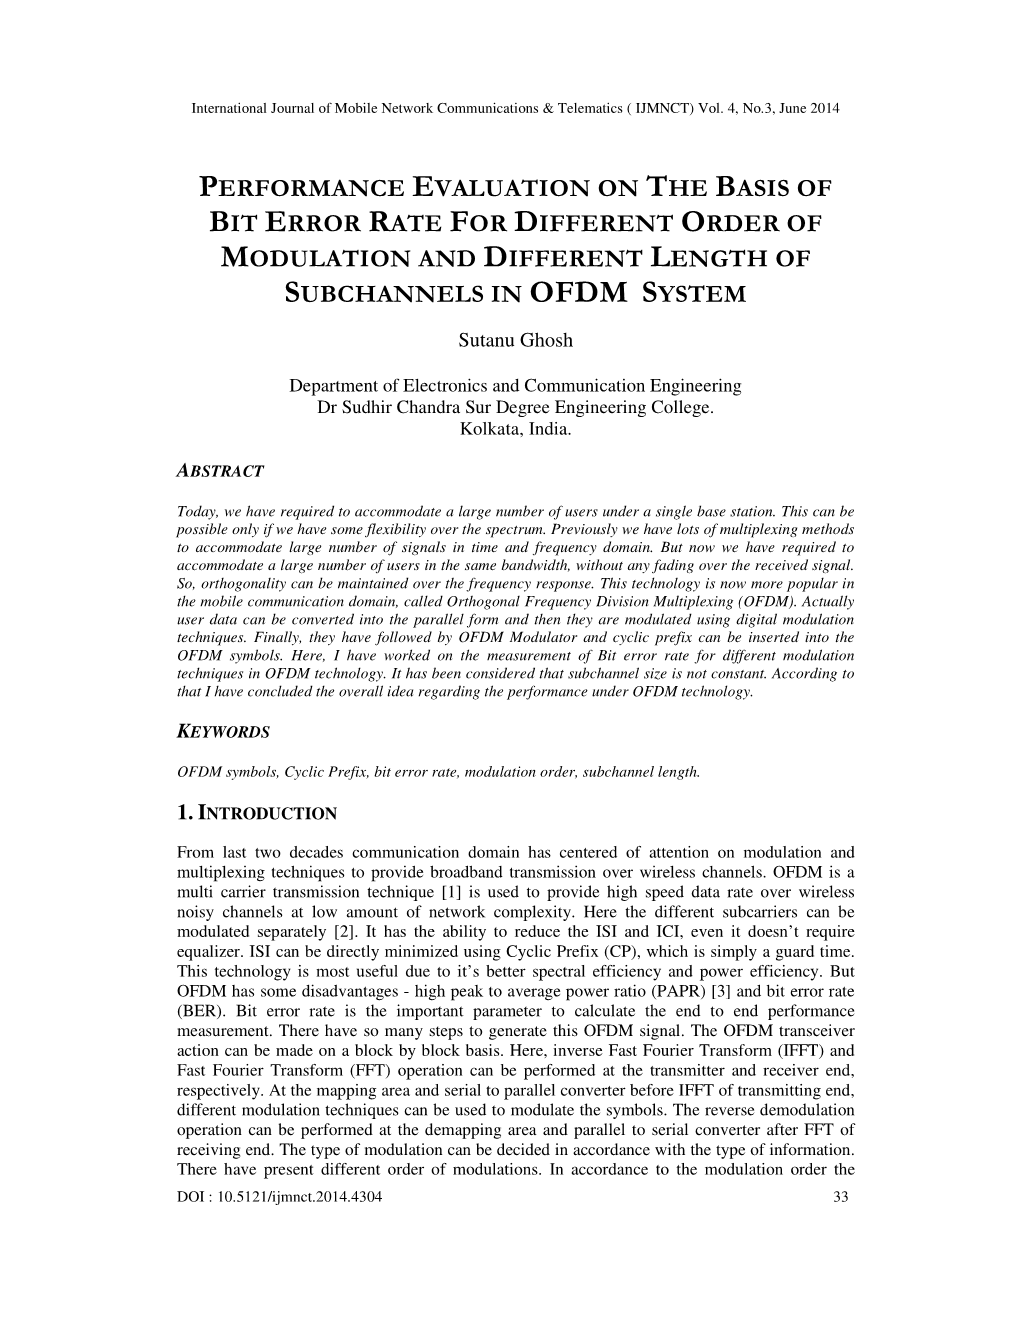 Performance Evaluation on the Basis of Bit Error Rate for Different Order of Modulation and Different Length of Subchannels in Ofdm System